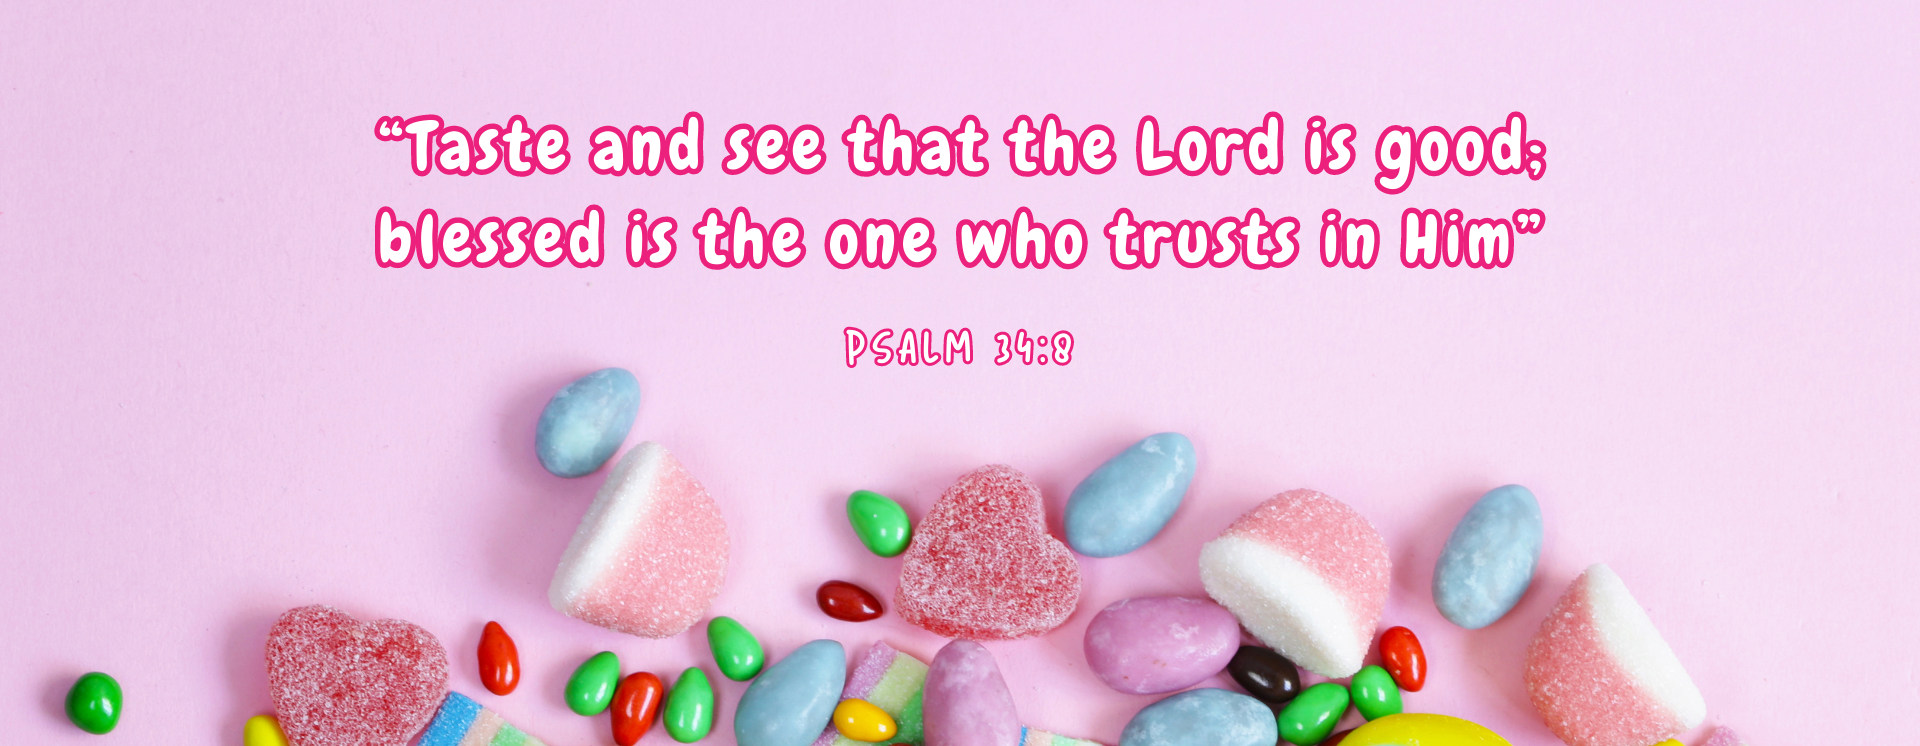 “Taste and see that the Lord is good; blessed is the one who trusts in Him” Psalm 34:8